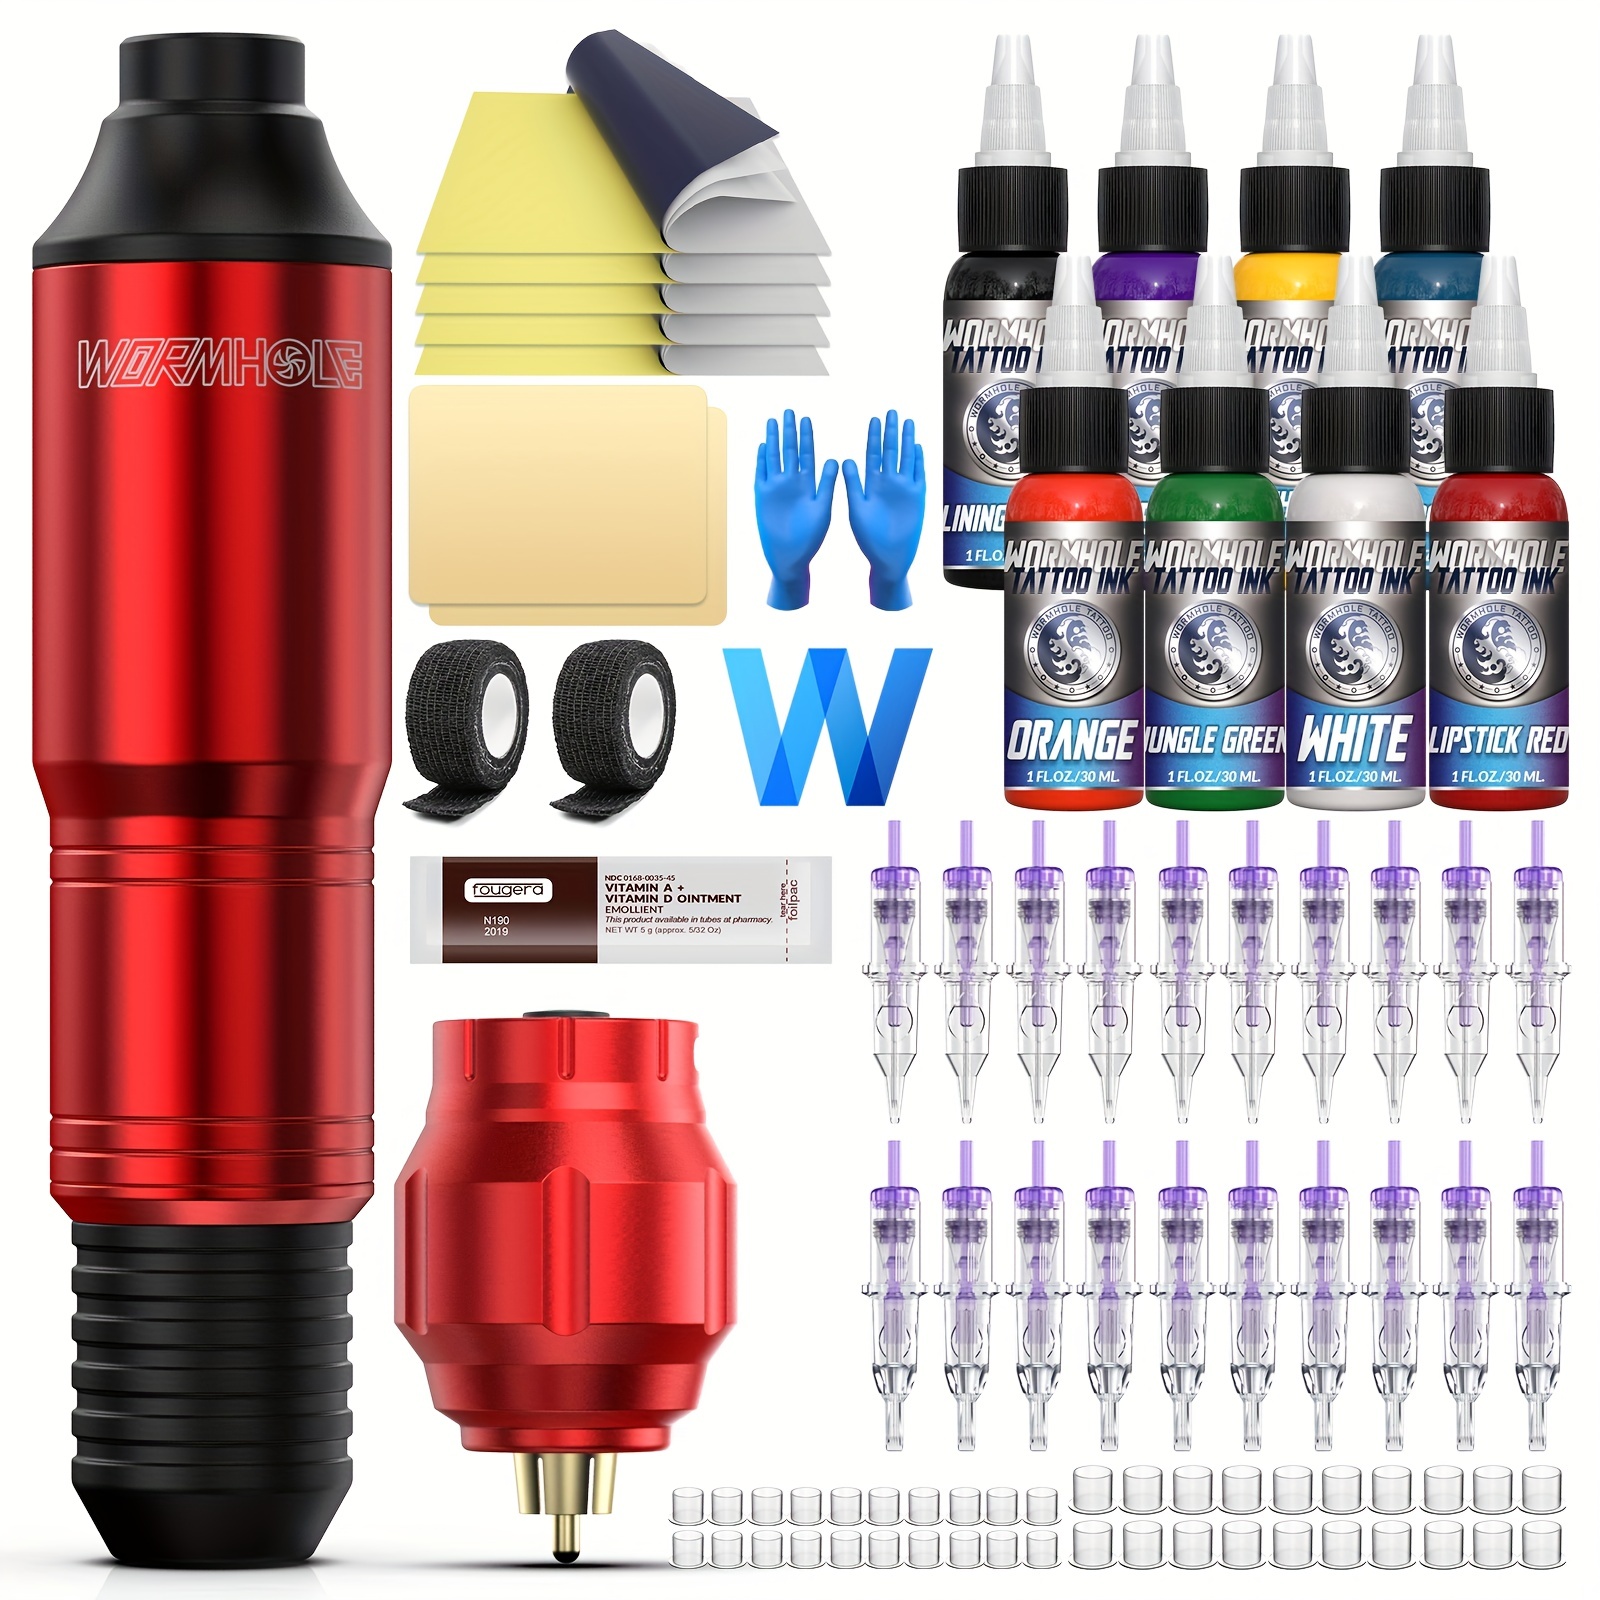 Wormhole Tattoo Pen Kit Review